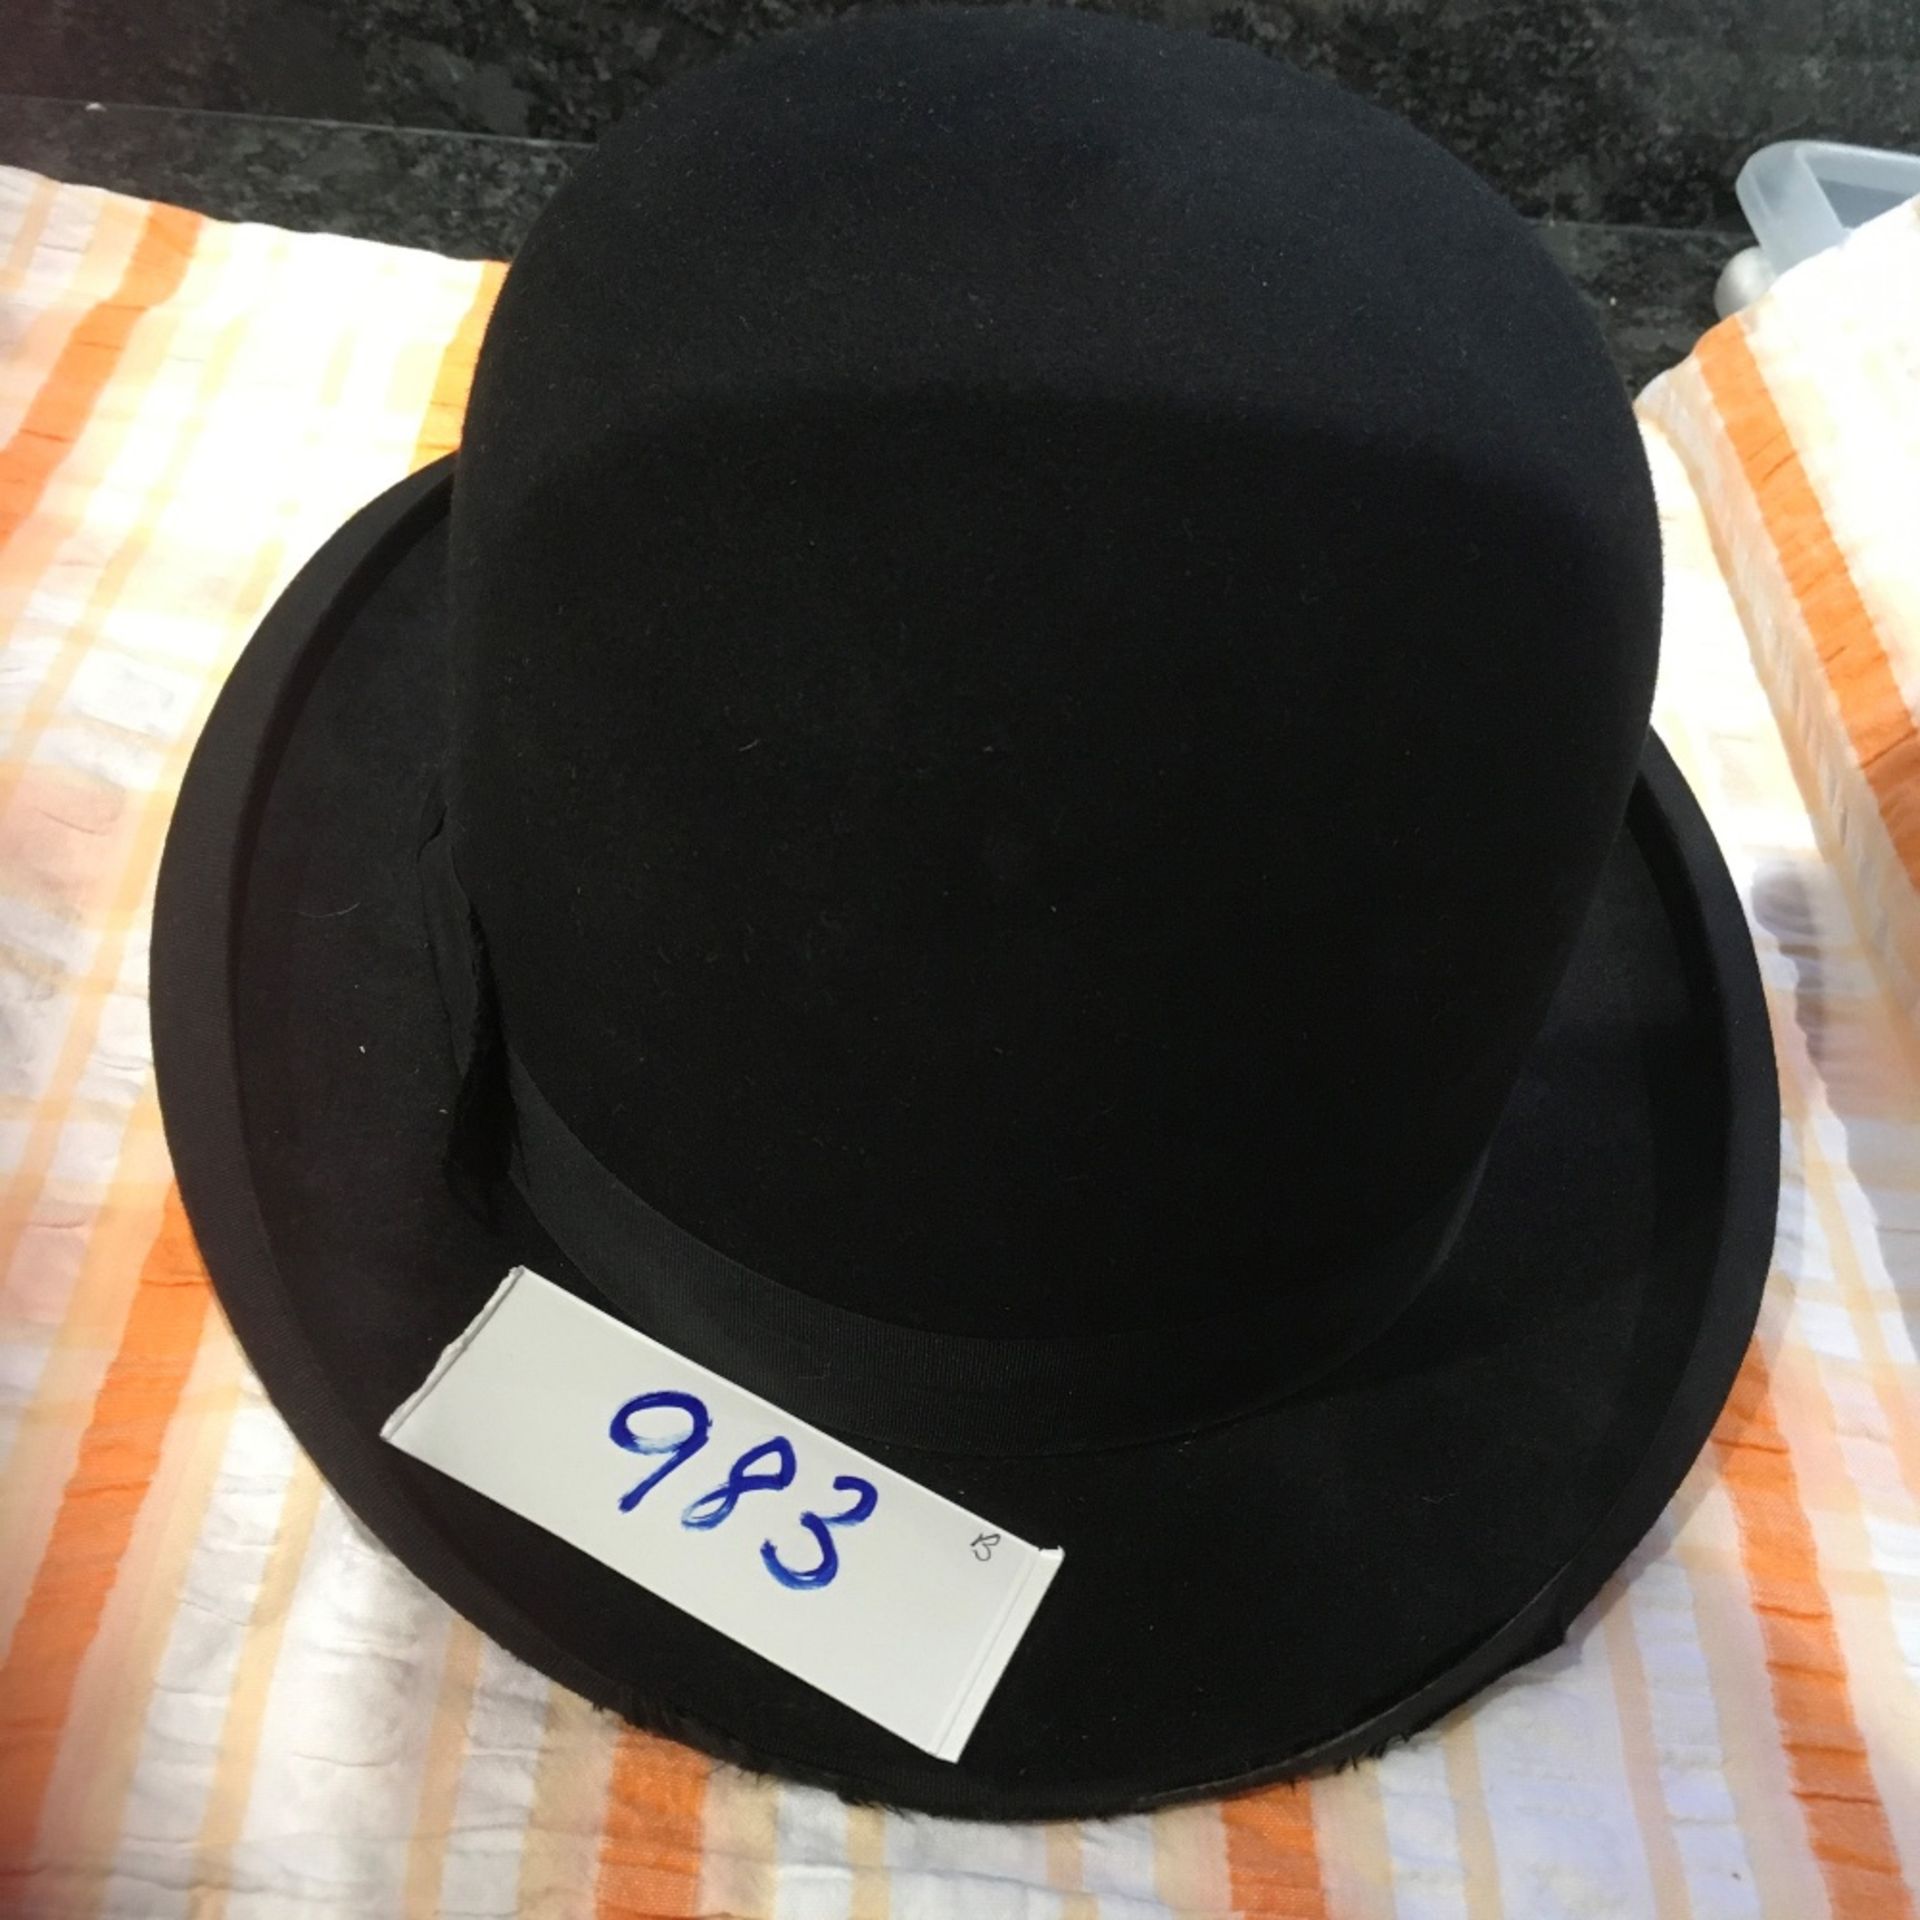 Black bowler hat, size 6.5ins (view in security pen)